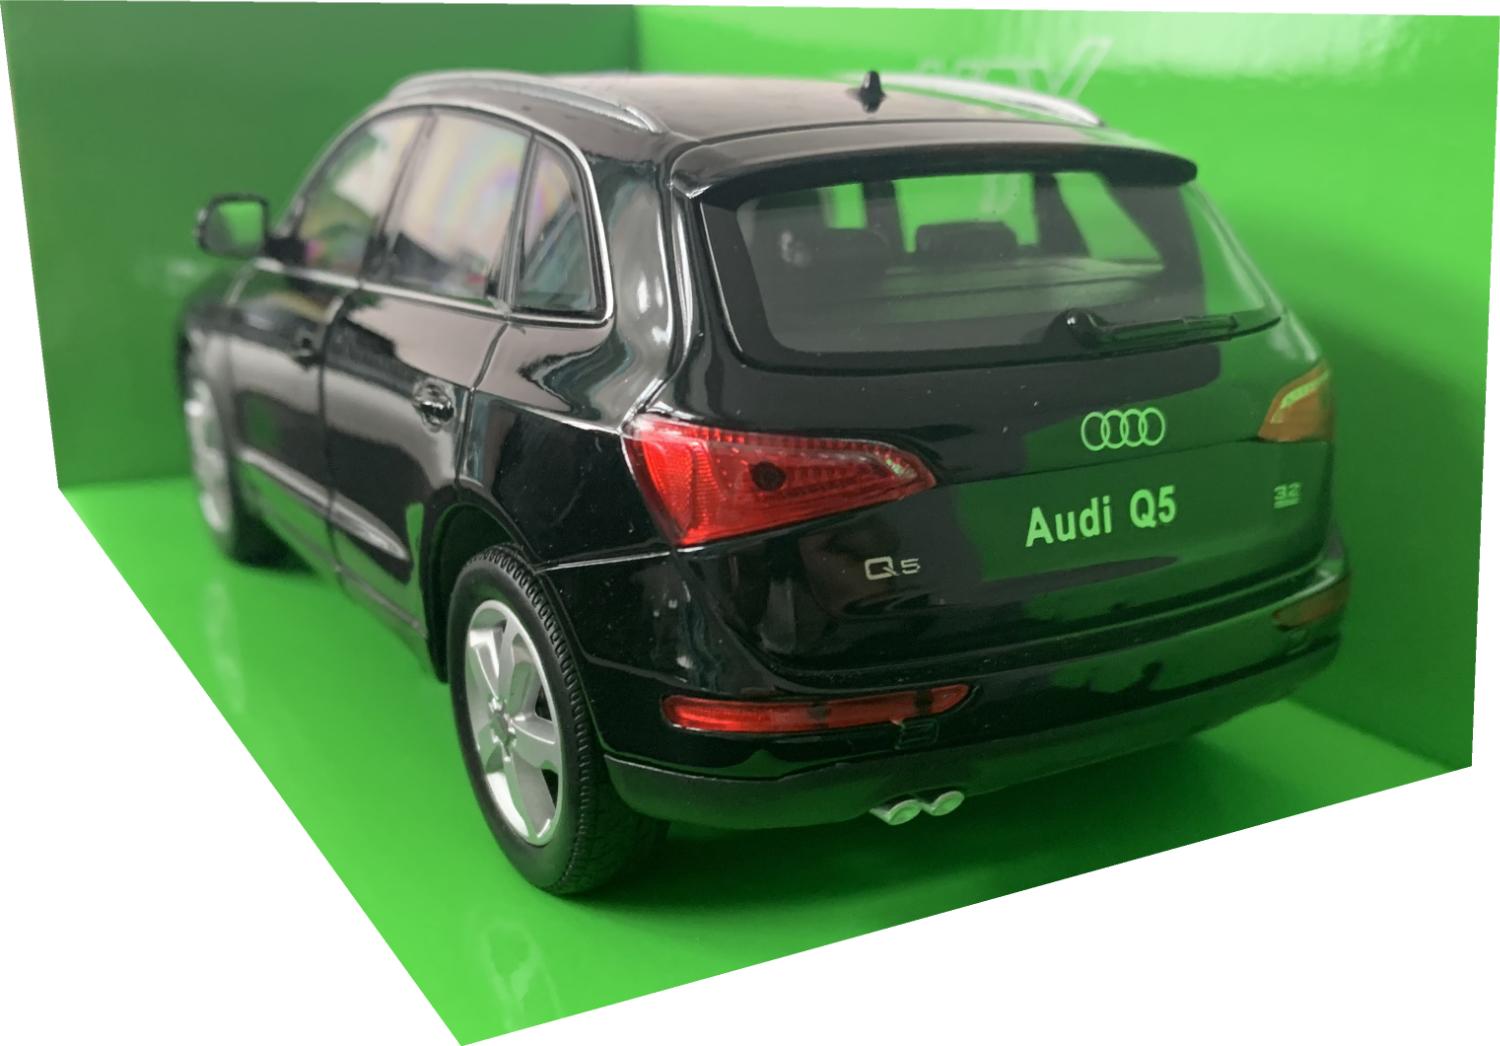 Audi Q5 3.2 Quartto in black 1:24 scale model from Welly